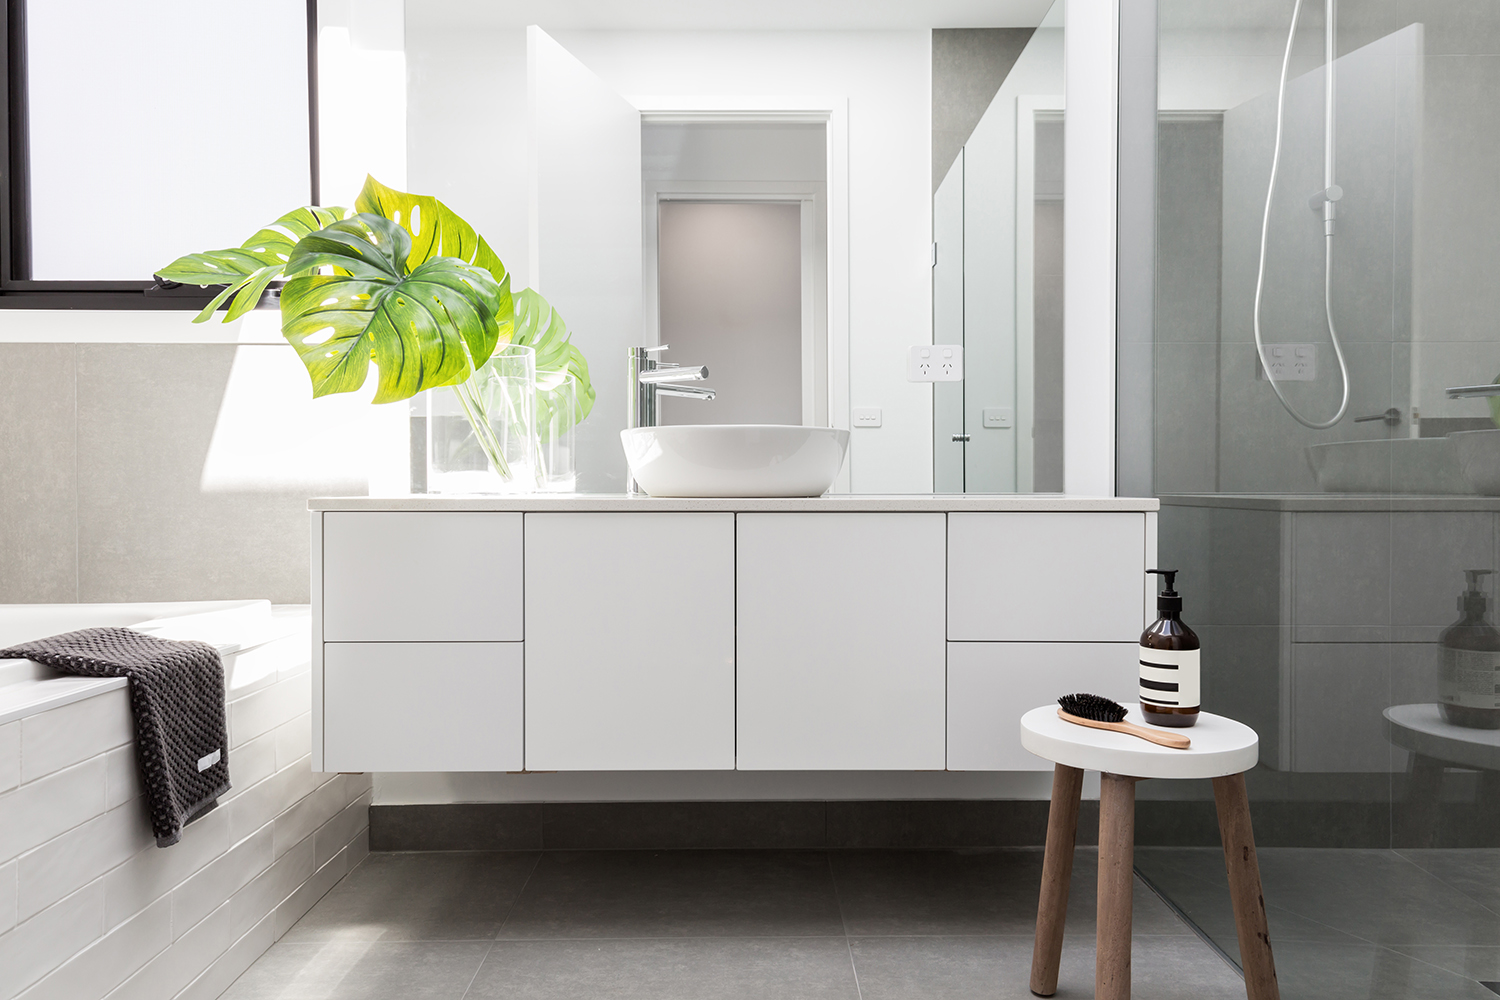 7 Tips to choose the right vanity materials for a bathroom